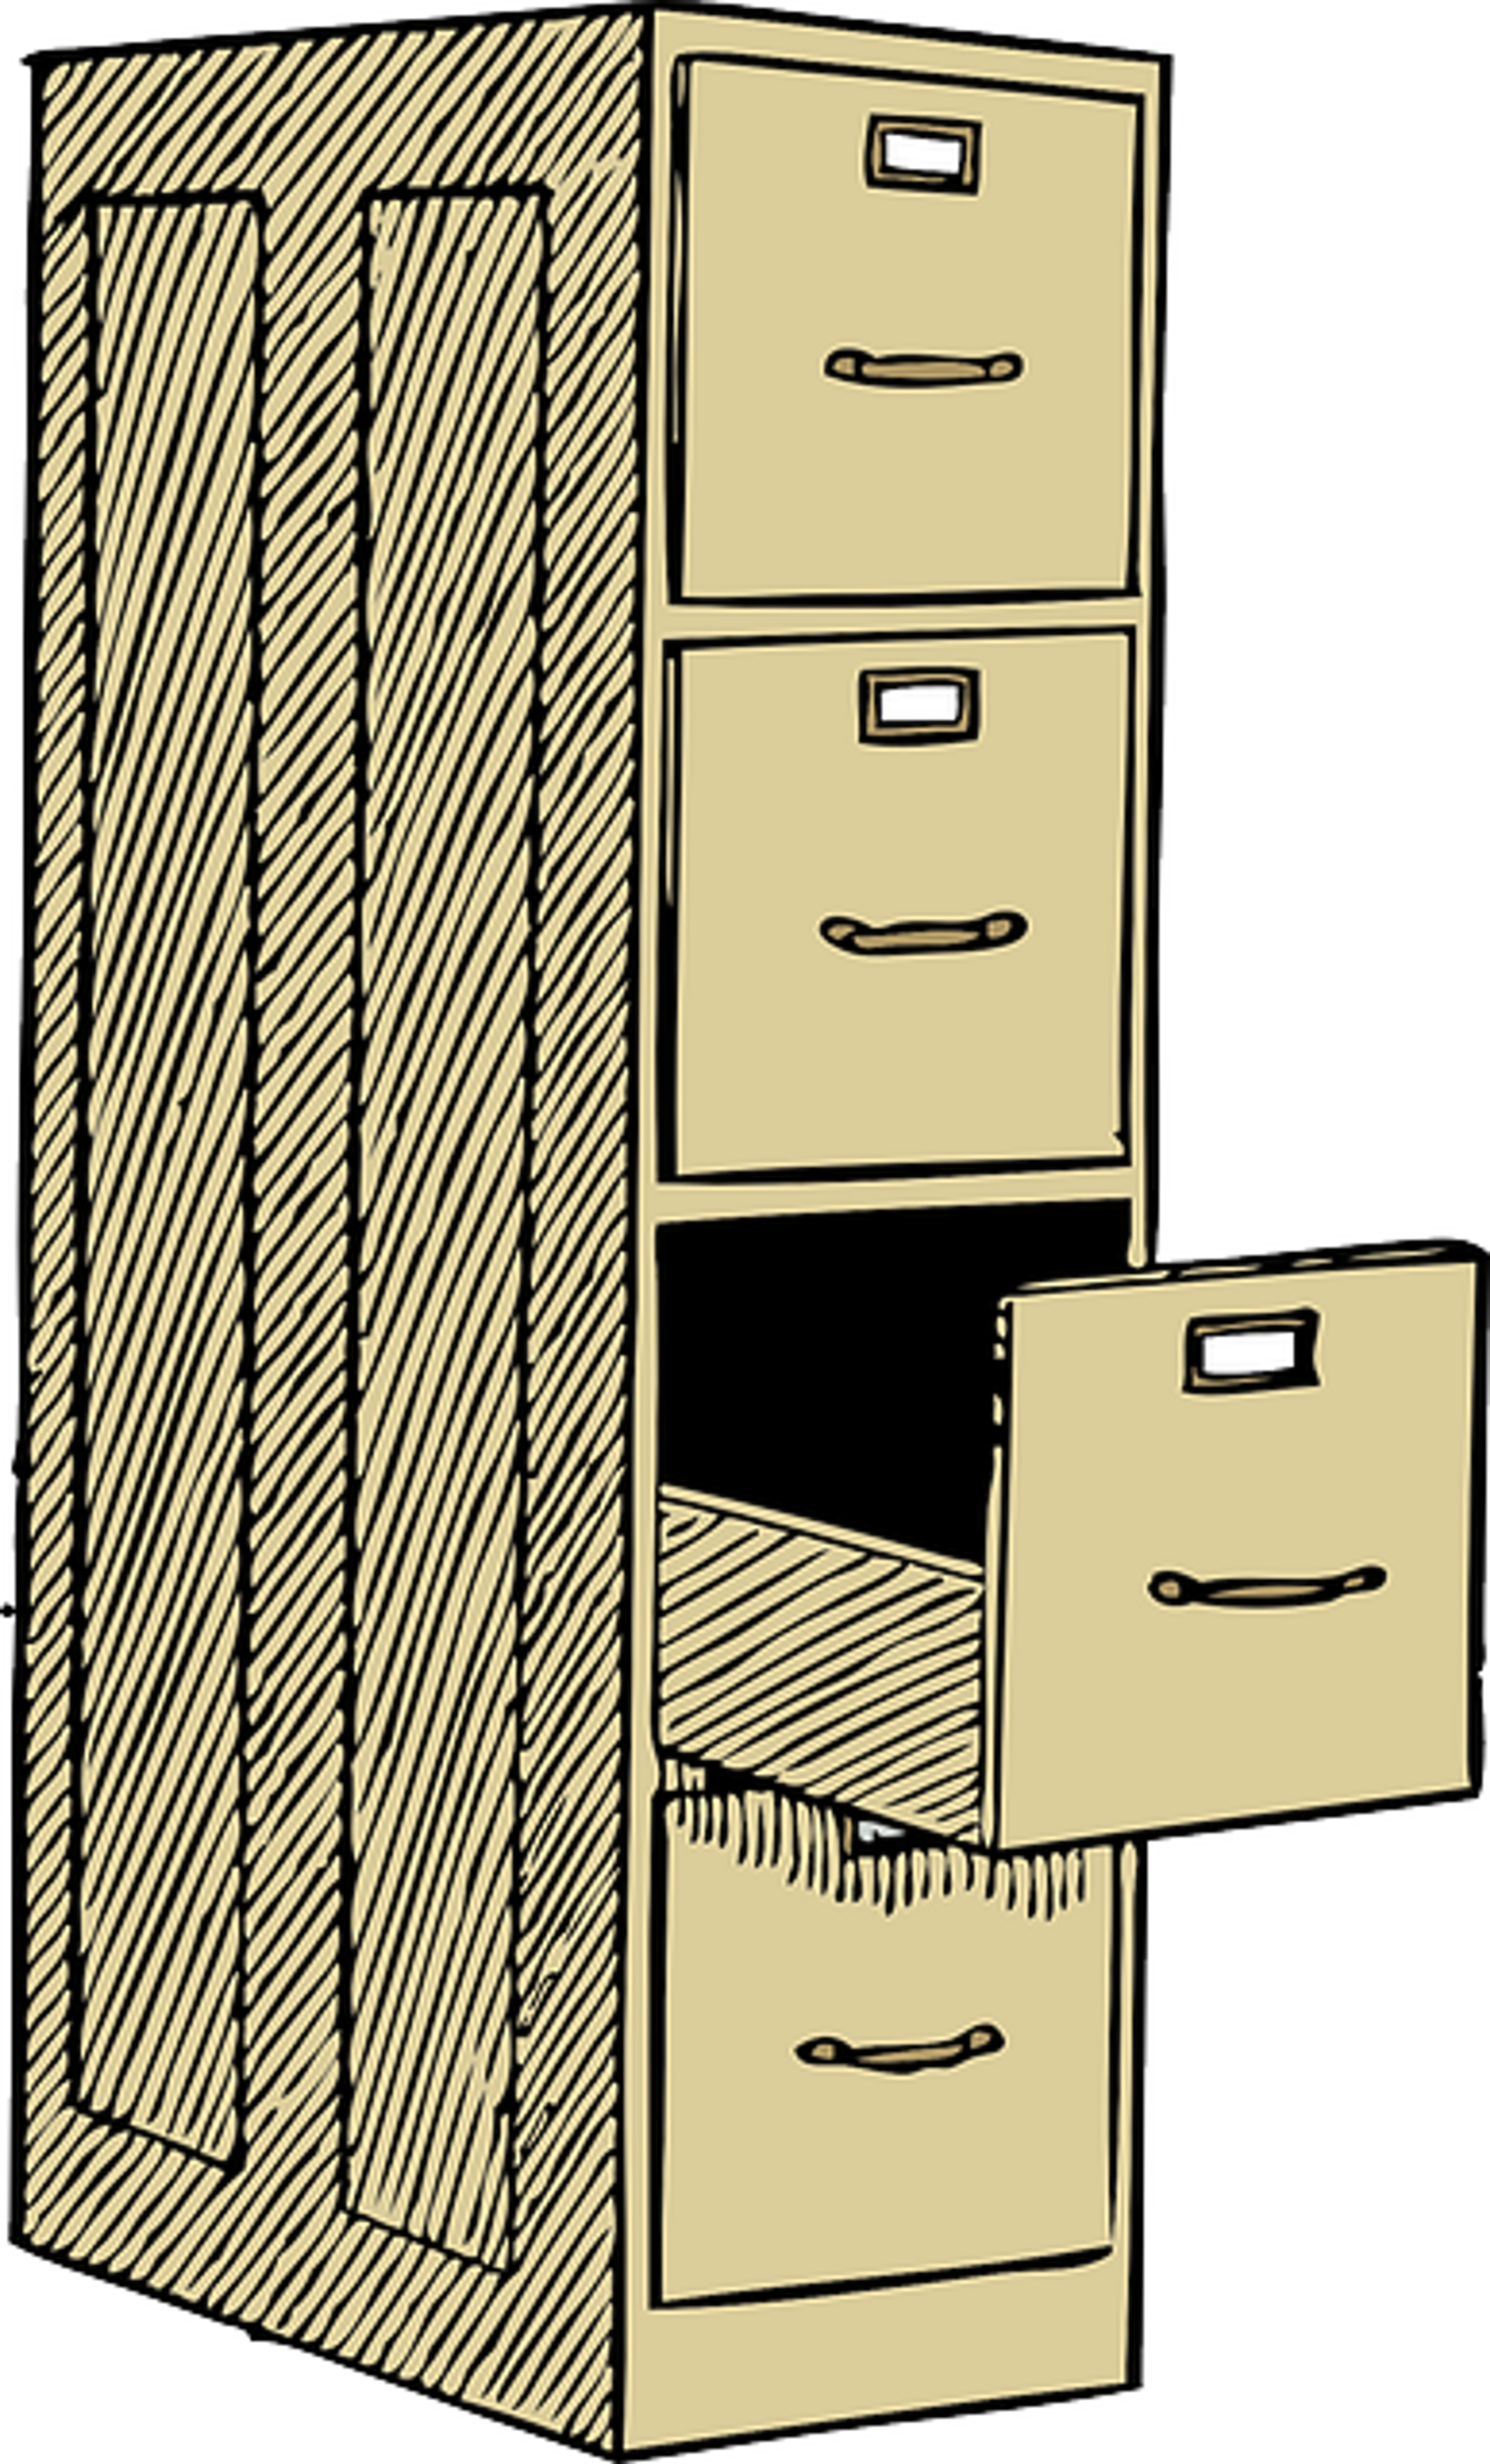 An image of a file cabinet